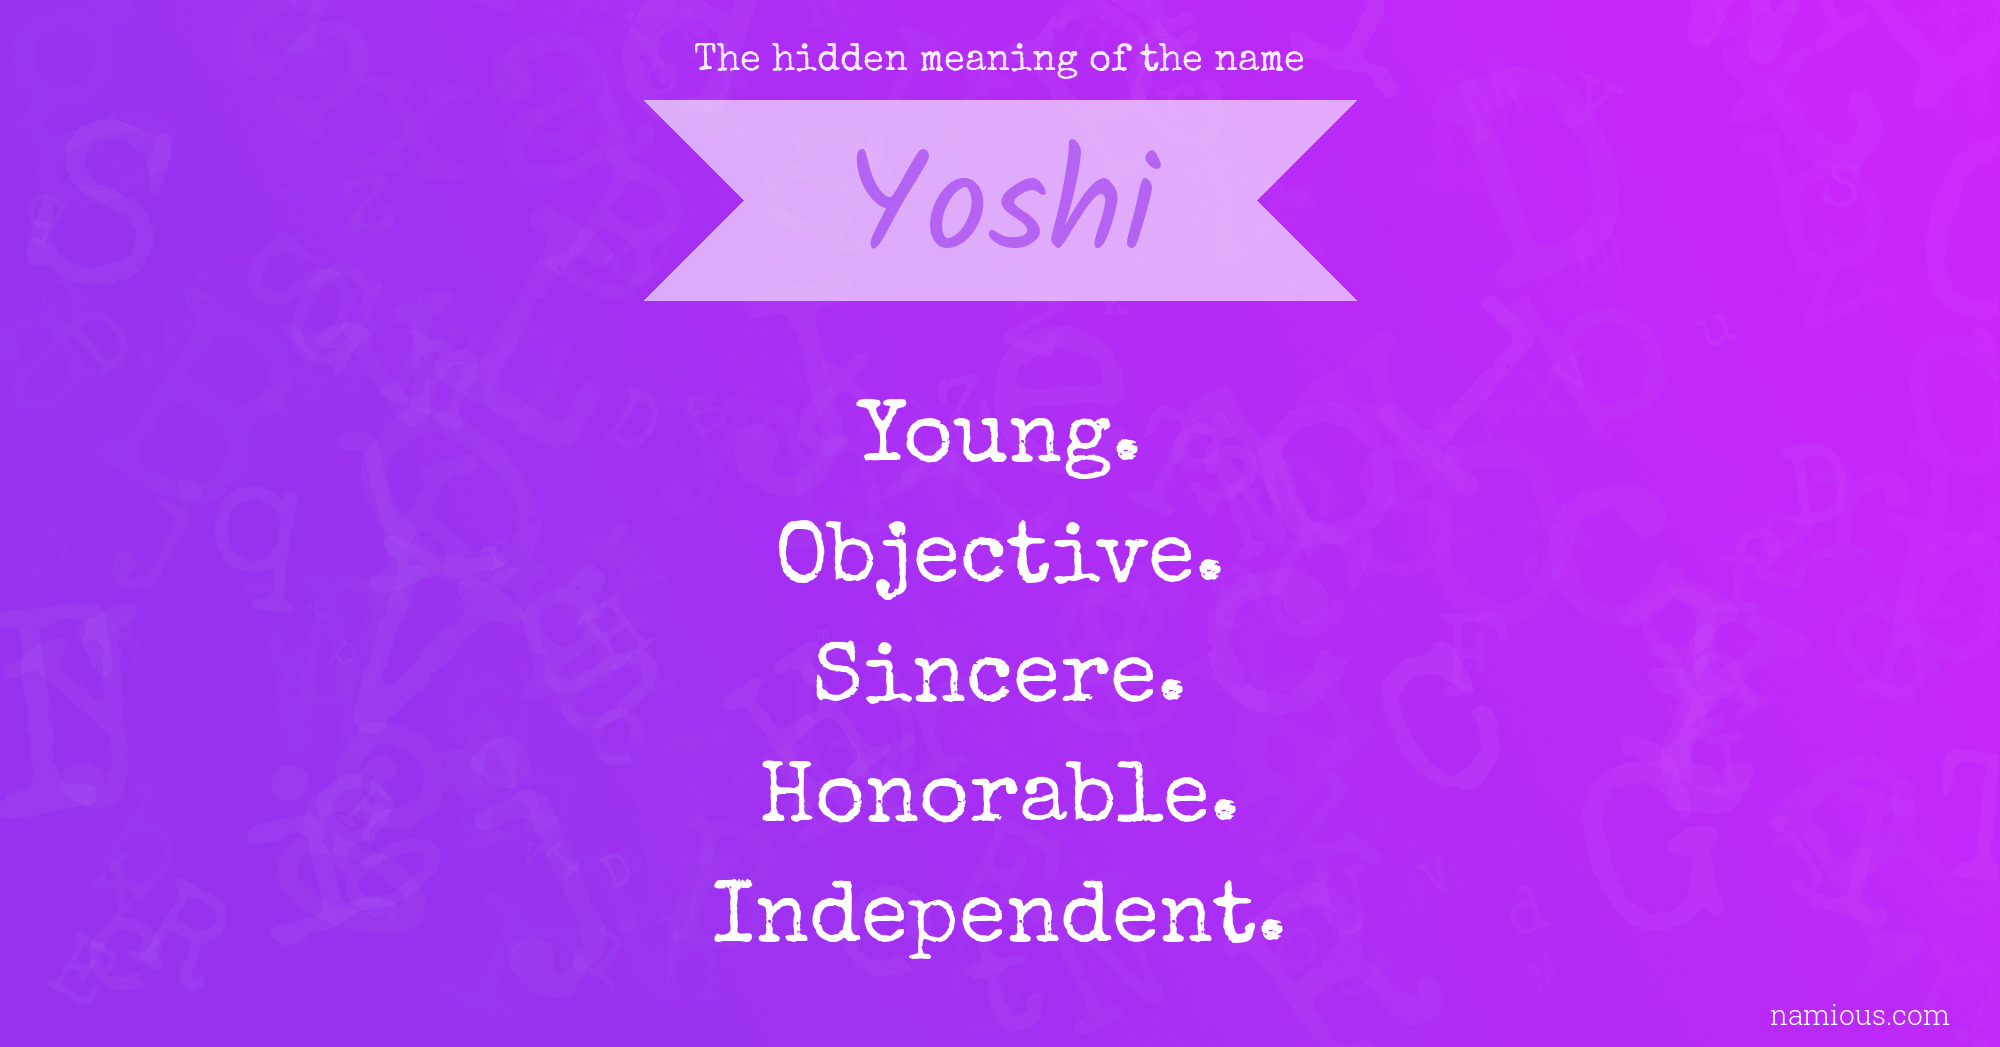 The hidden meaning of the name Yoshi